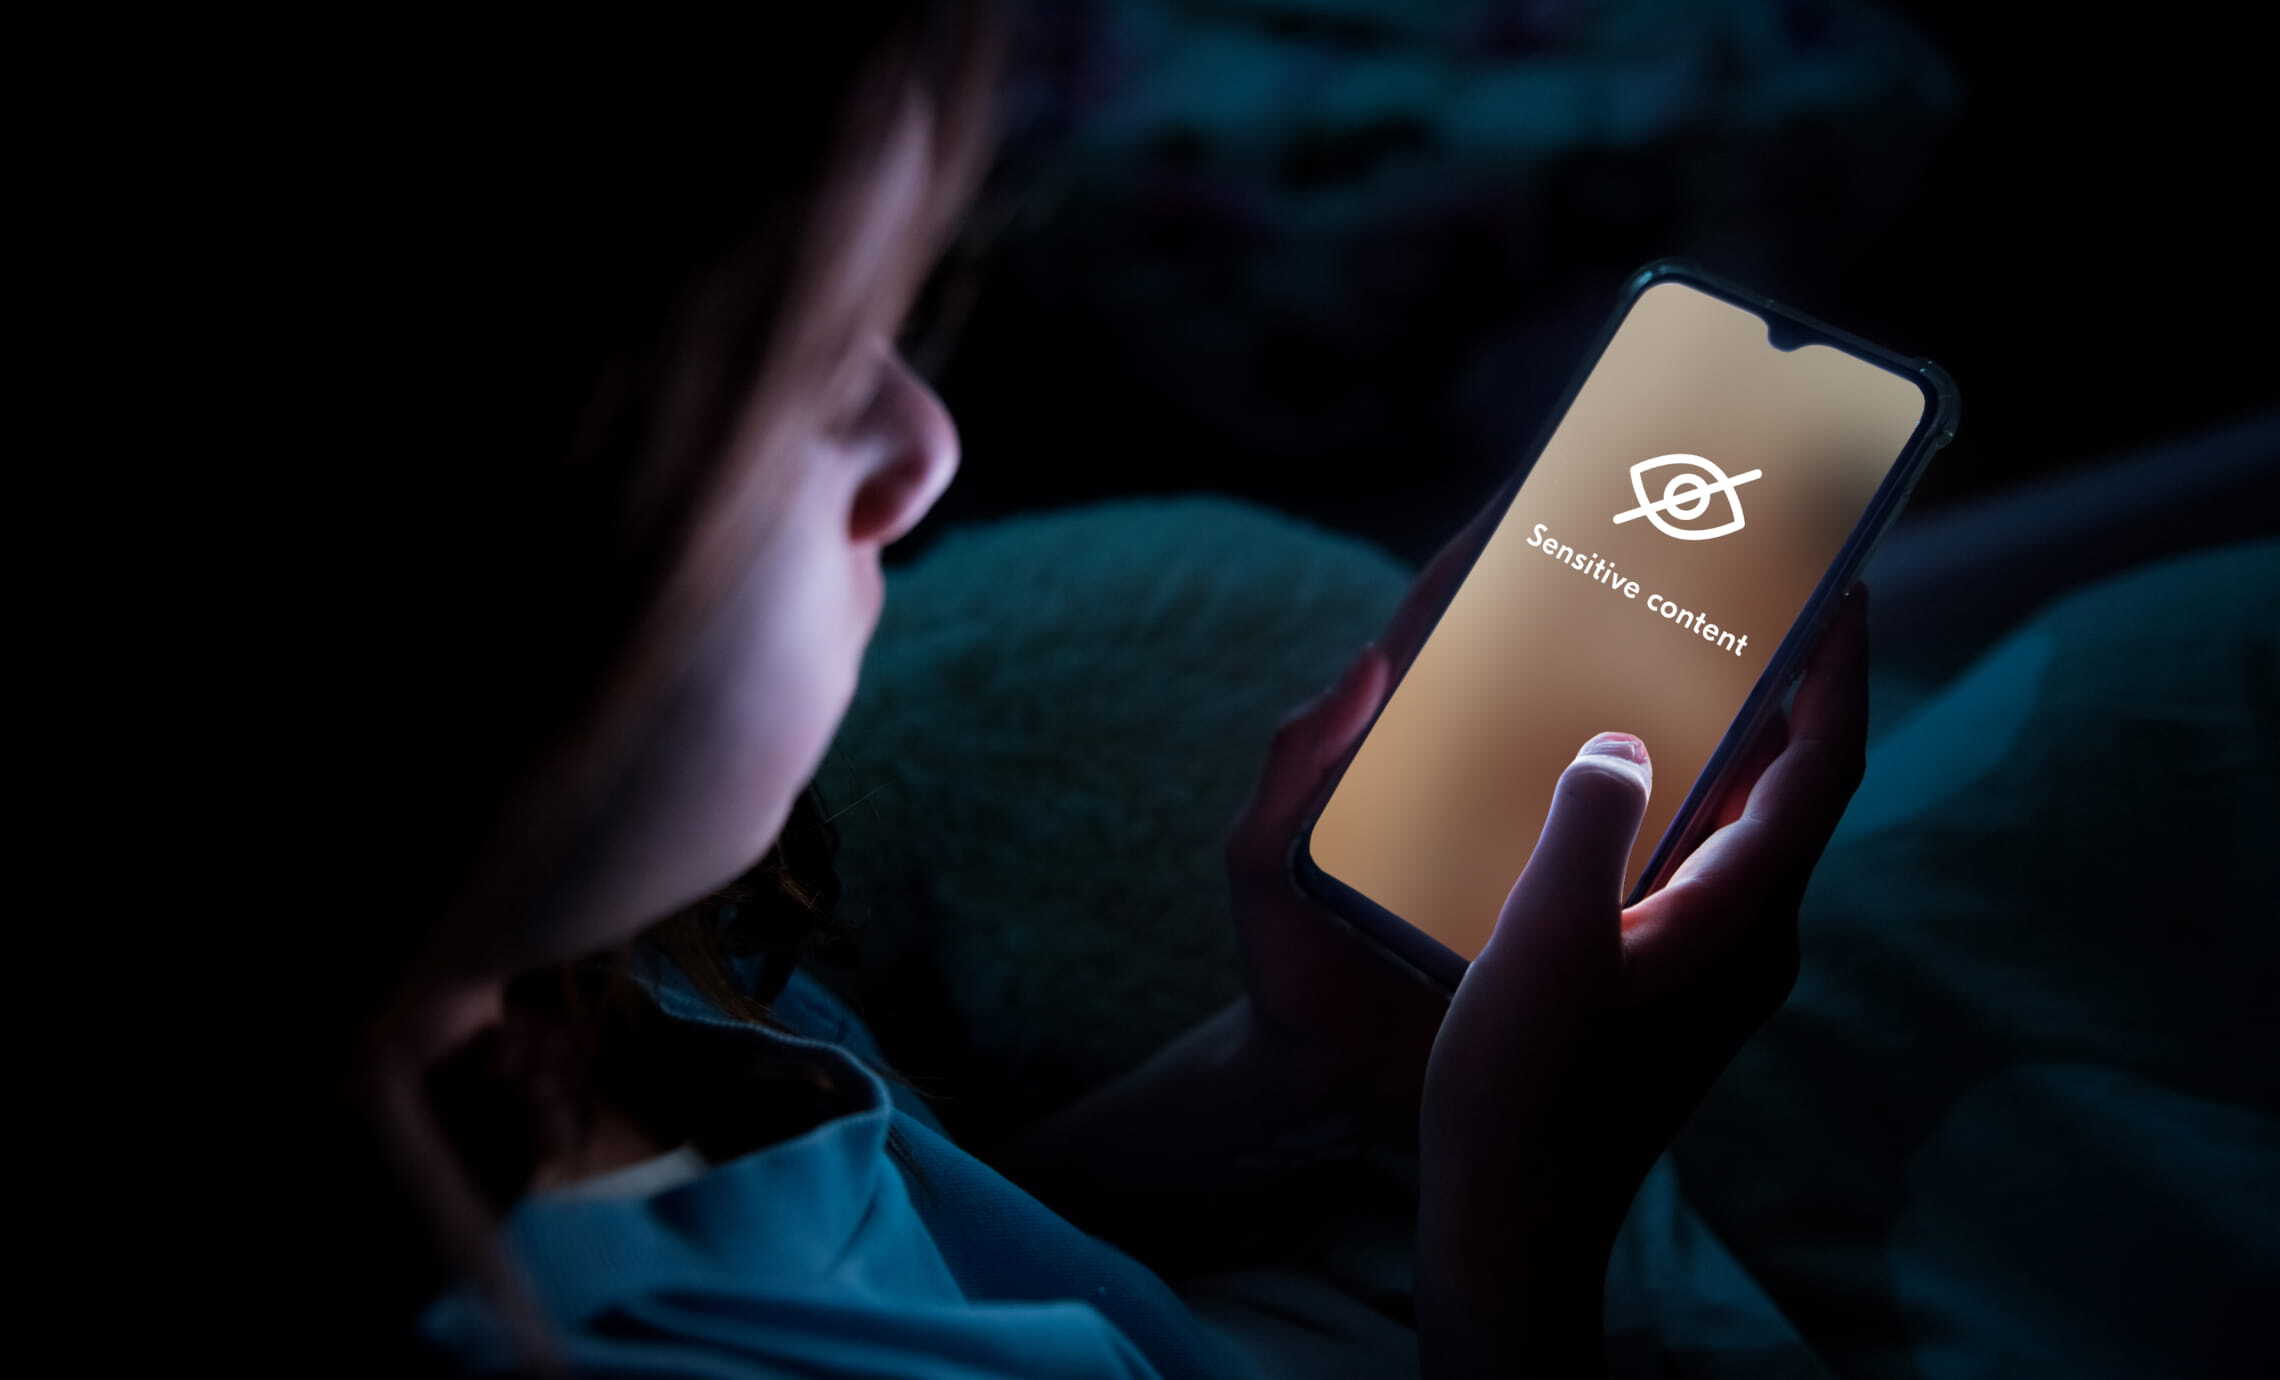 An image of a young person looking at a phone screen. The content on the phone has been blurred out. It has been replaced with a graphic of a crossed-out eye and the words "sensitive content".